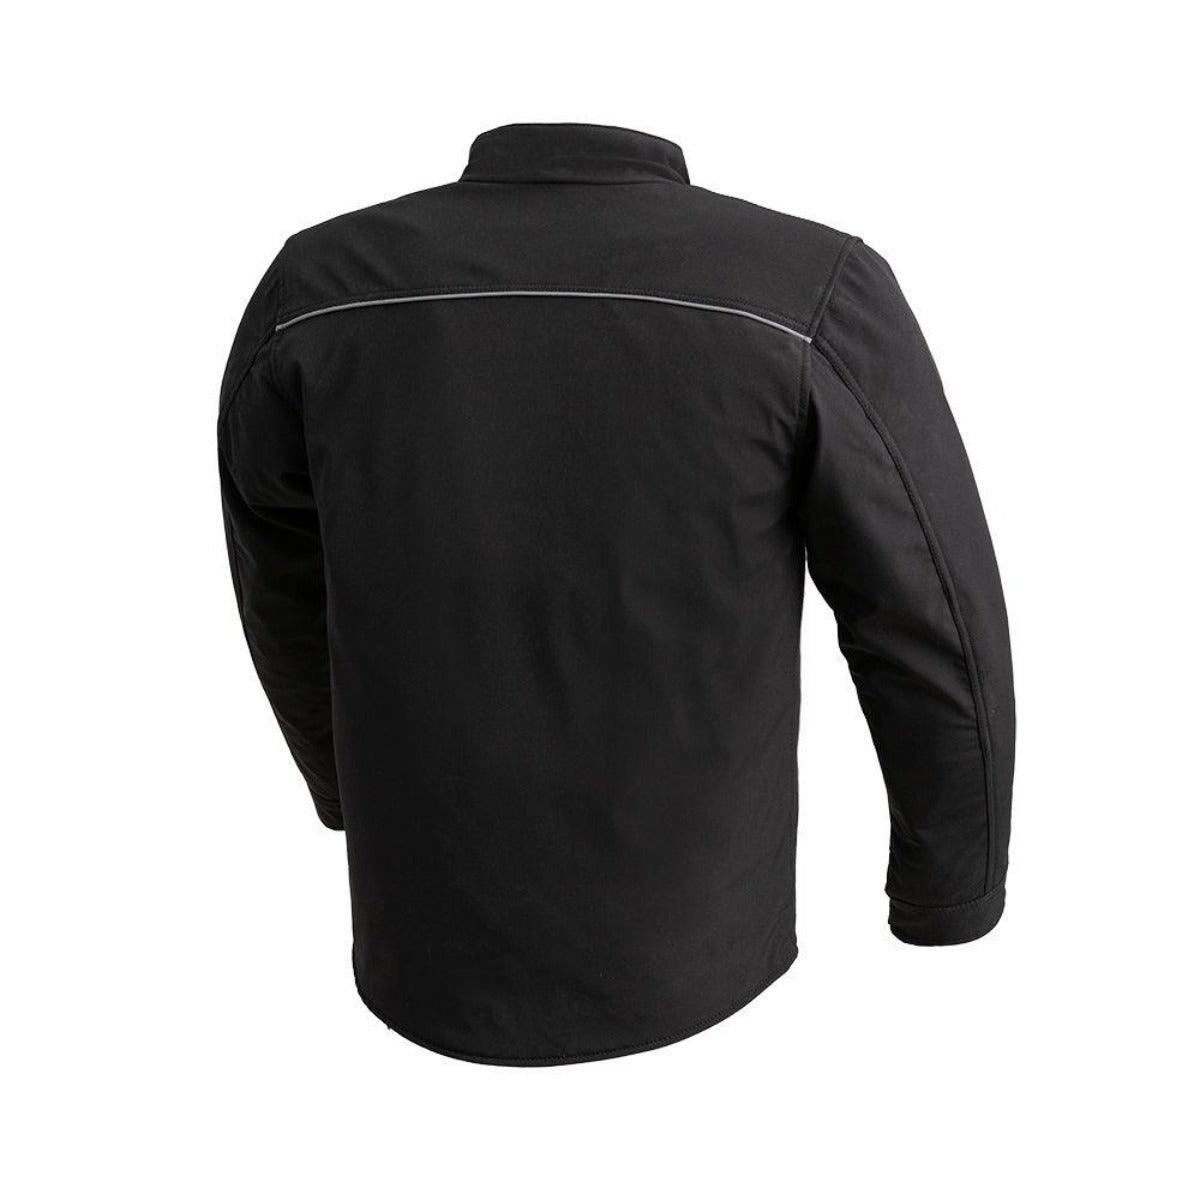 First Manufacturing Furnace - Men's Breathable Heated Jacket with Armor - American Legend Rider